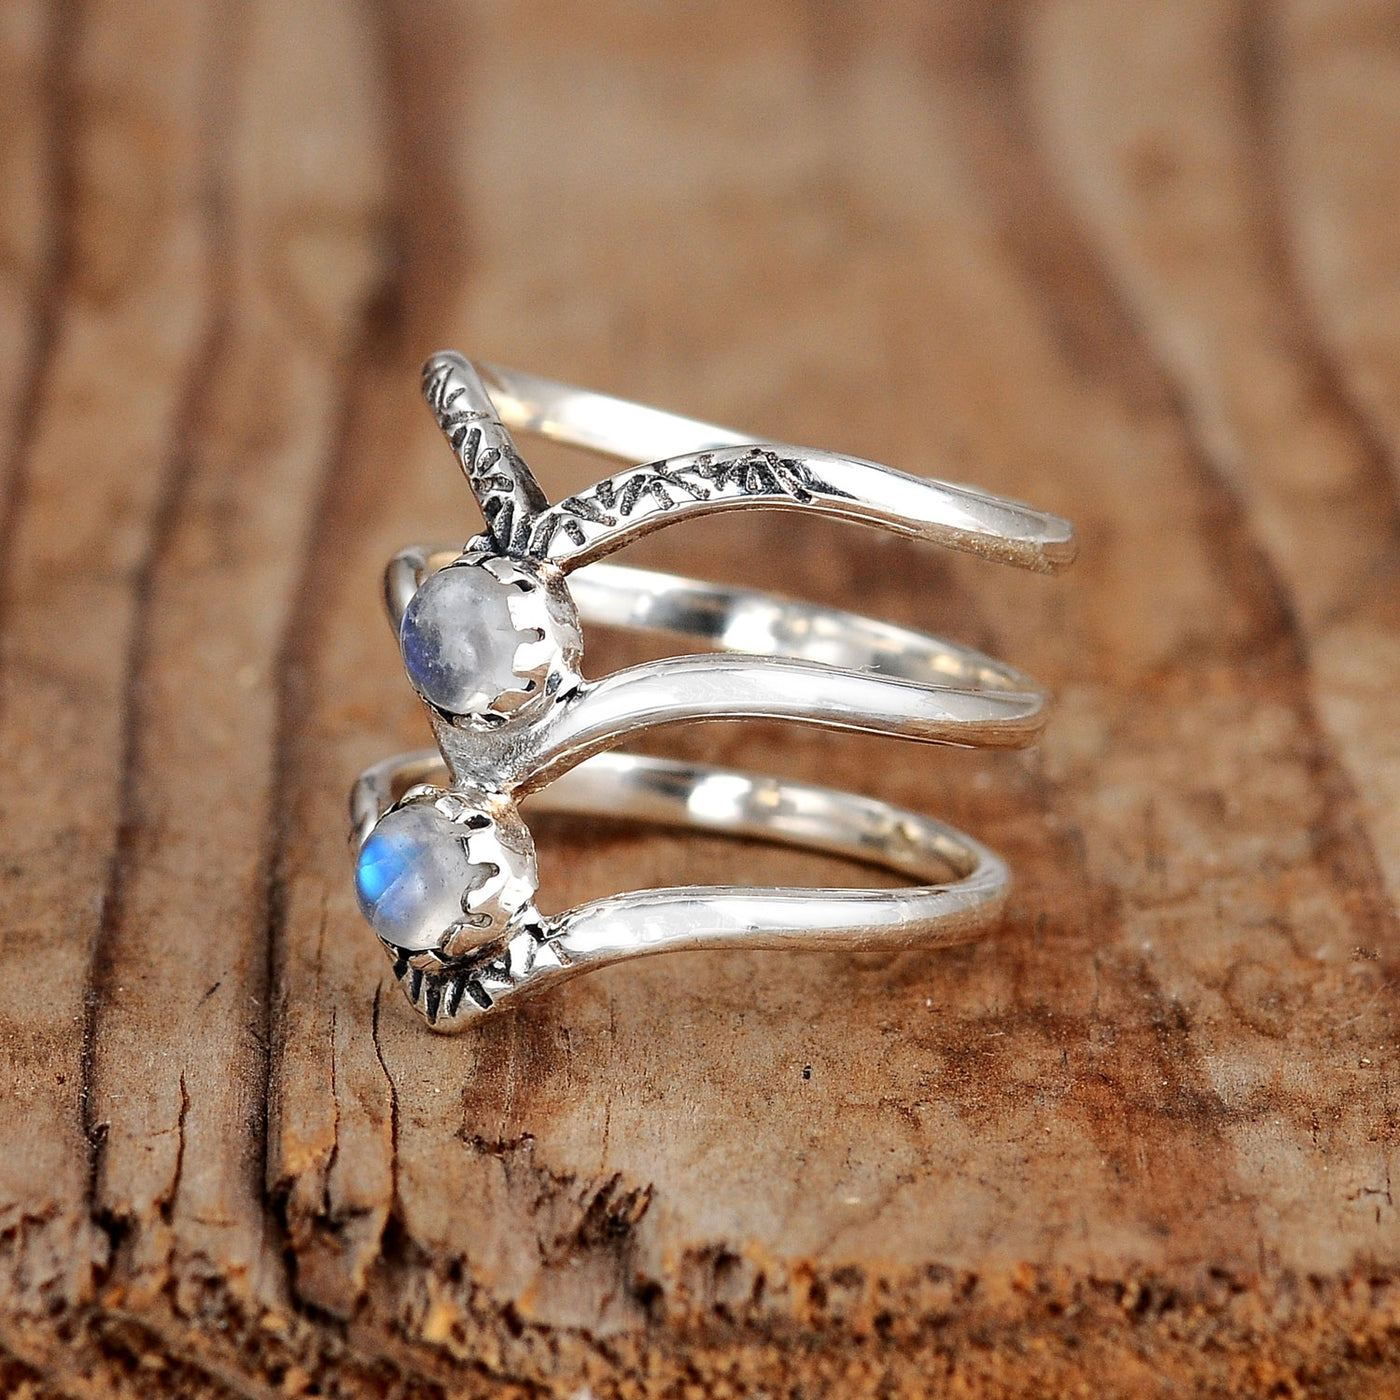 Triple Chevron Boho Ring with Moonstone Sterling Silver